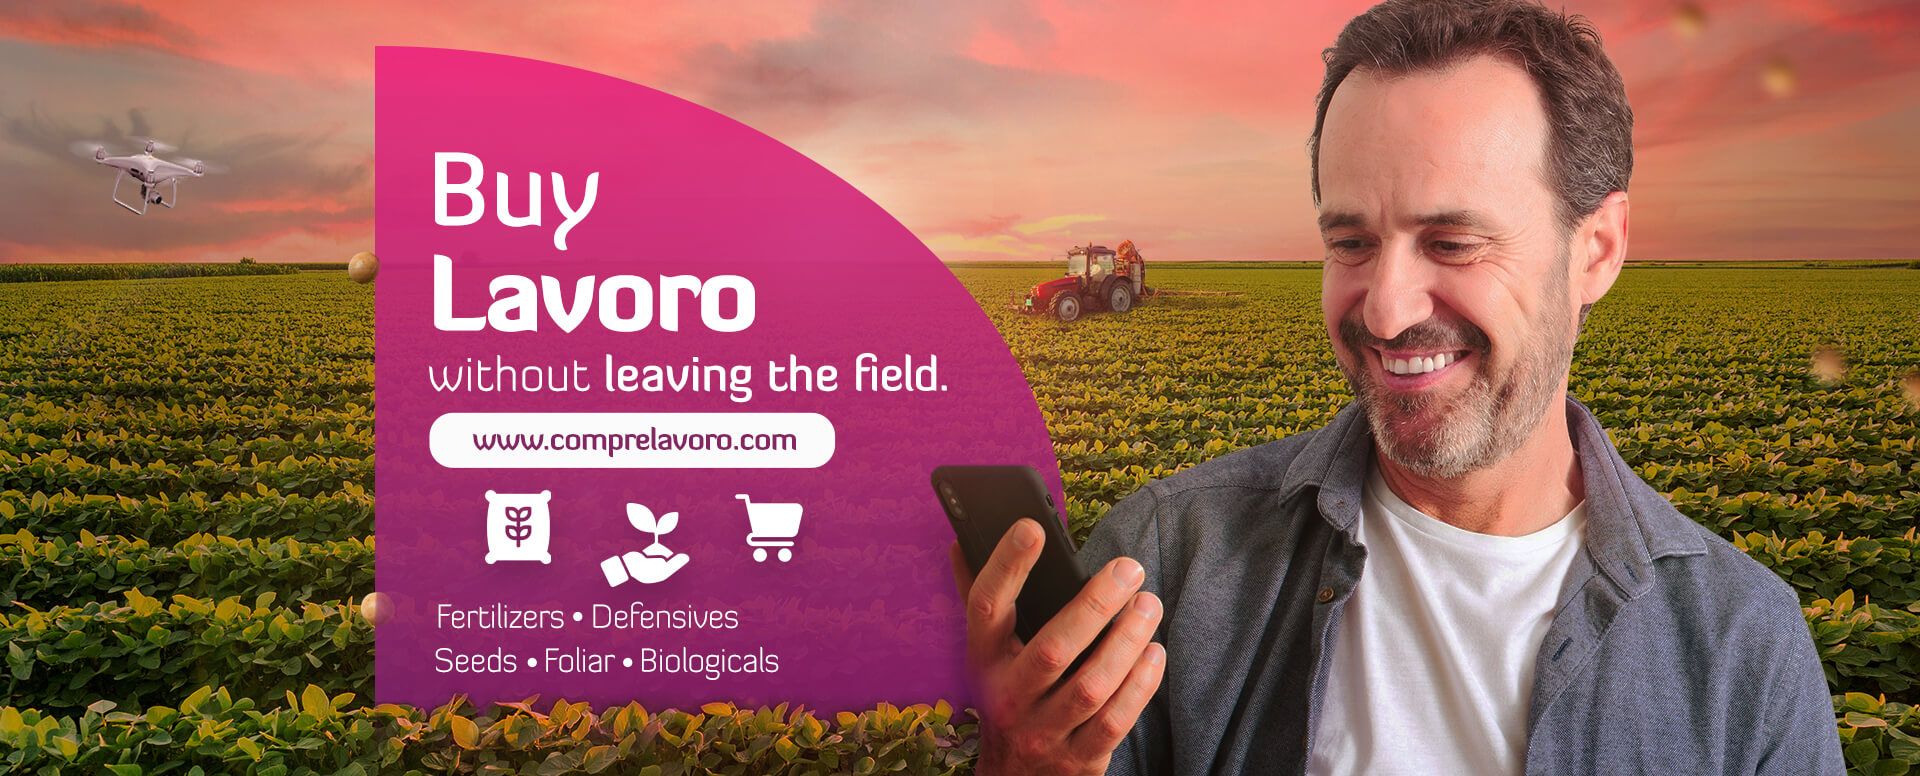 Banner Buy Lavoro without leaving the field.